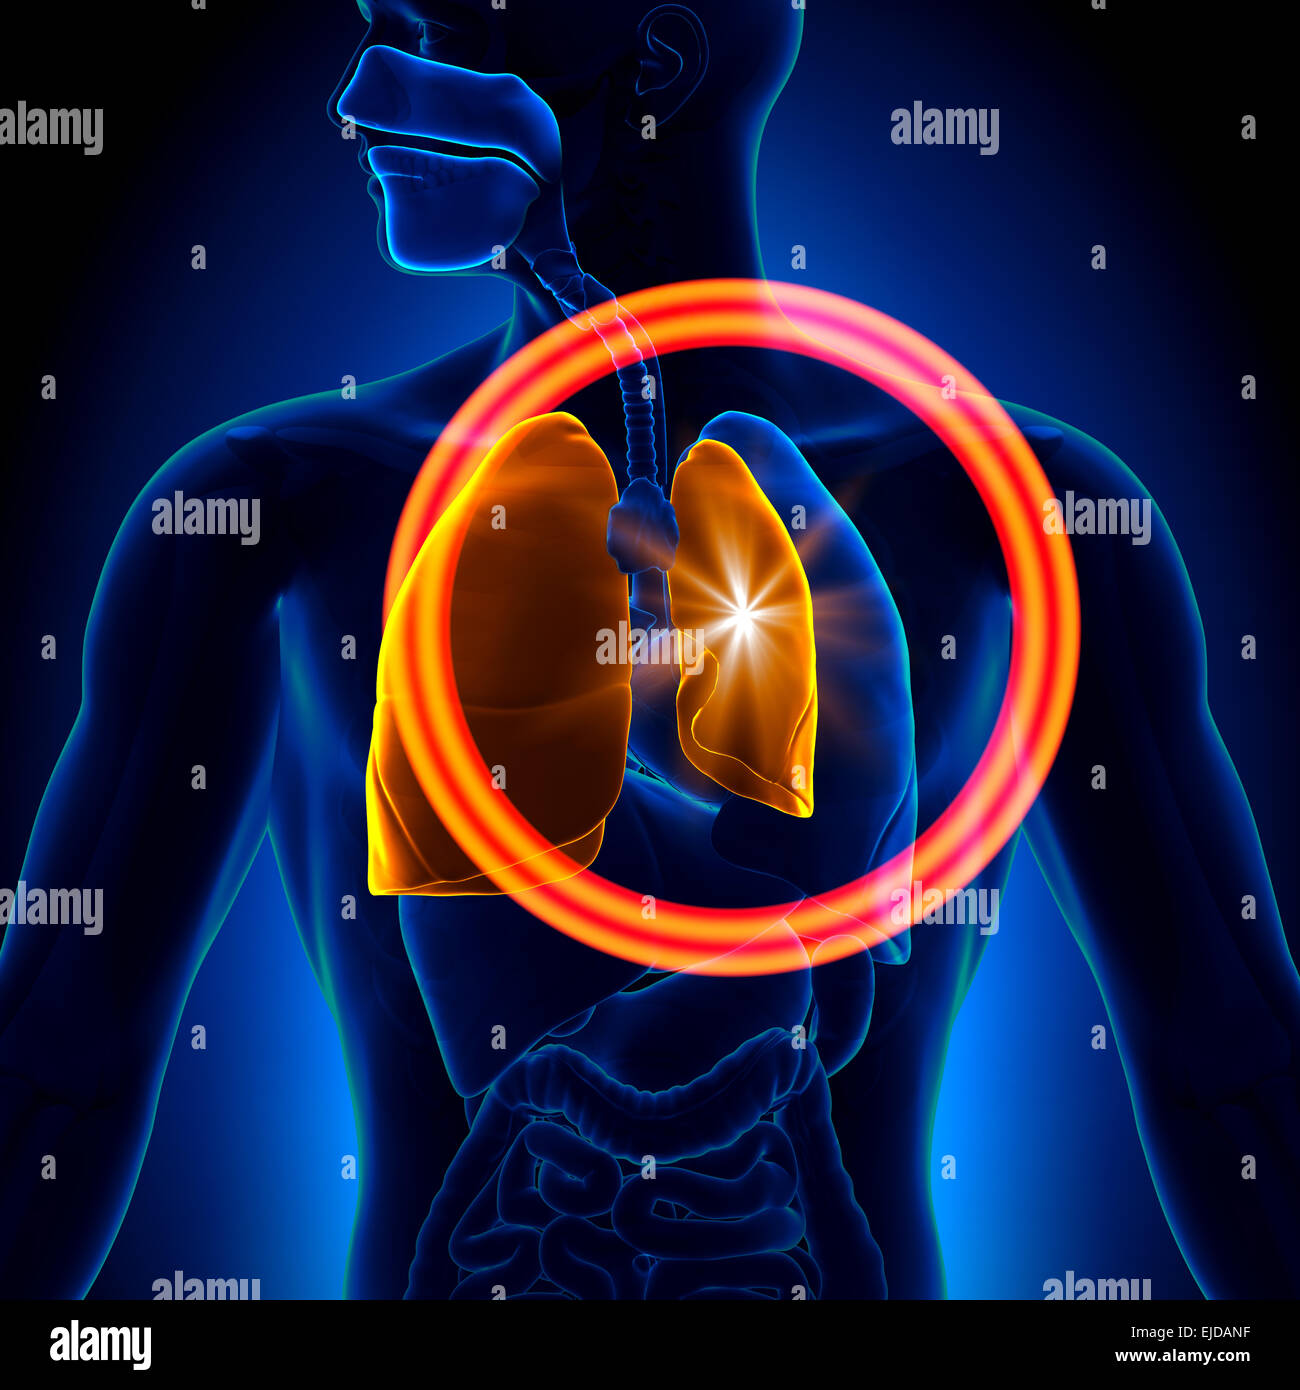 Pneumothorax - Collapsed Lung in detail Stock Photo